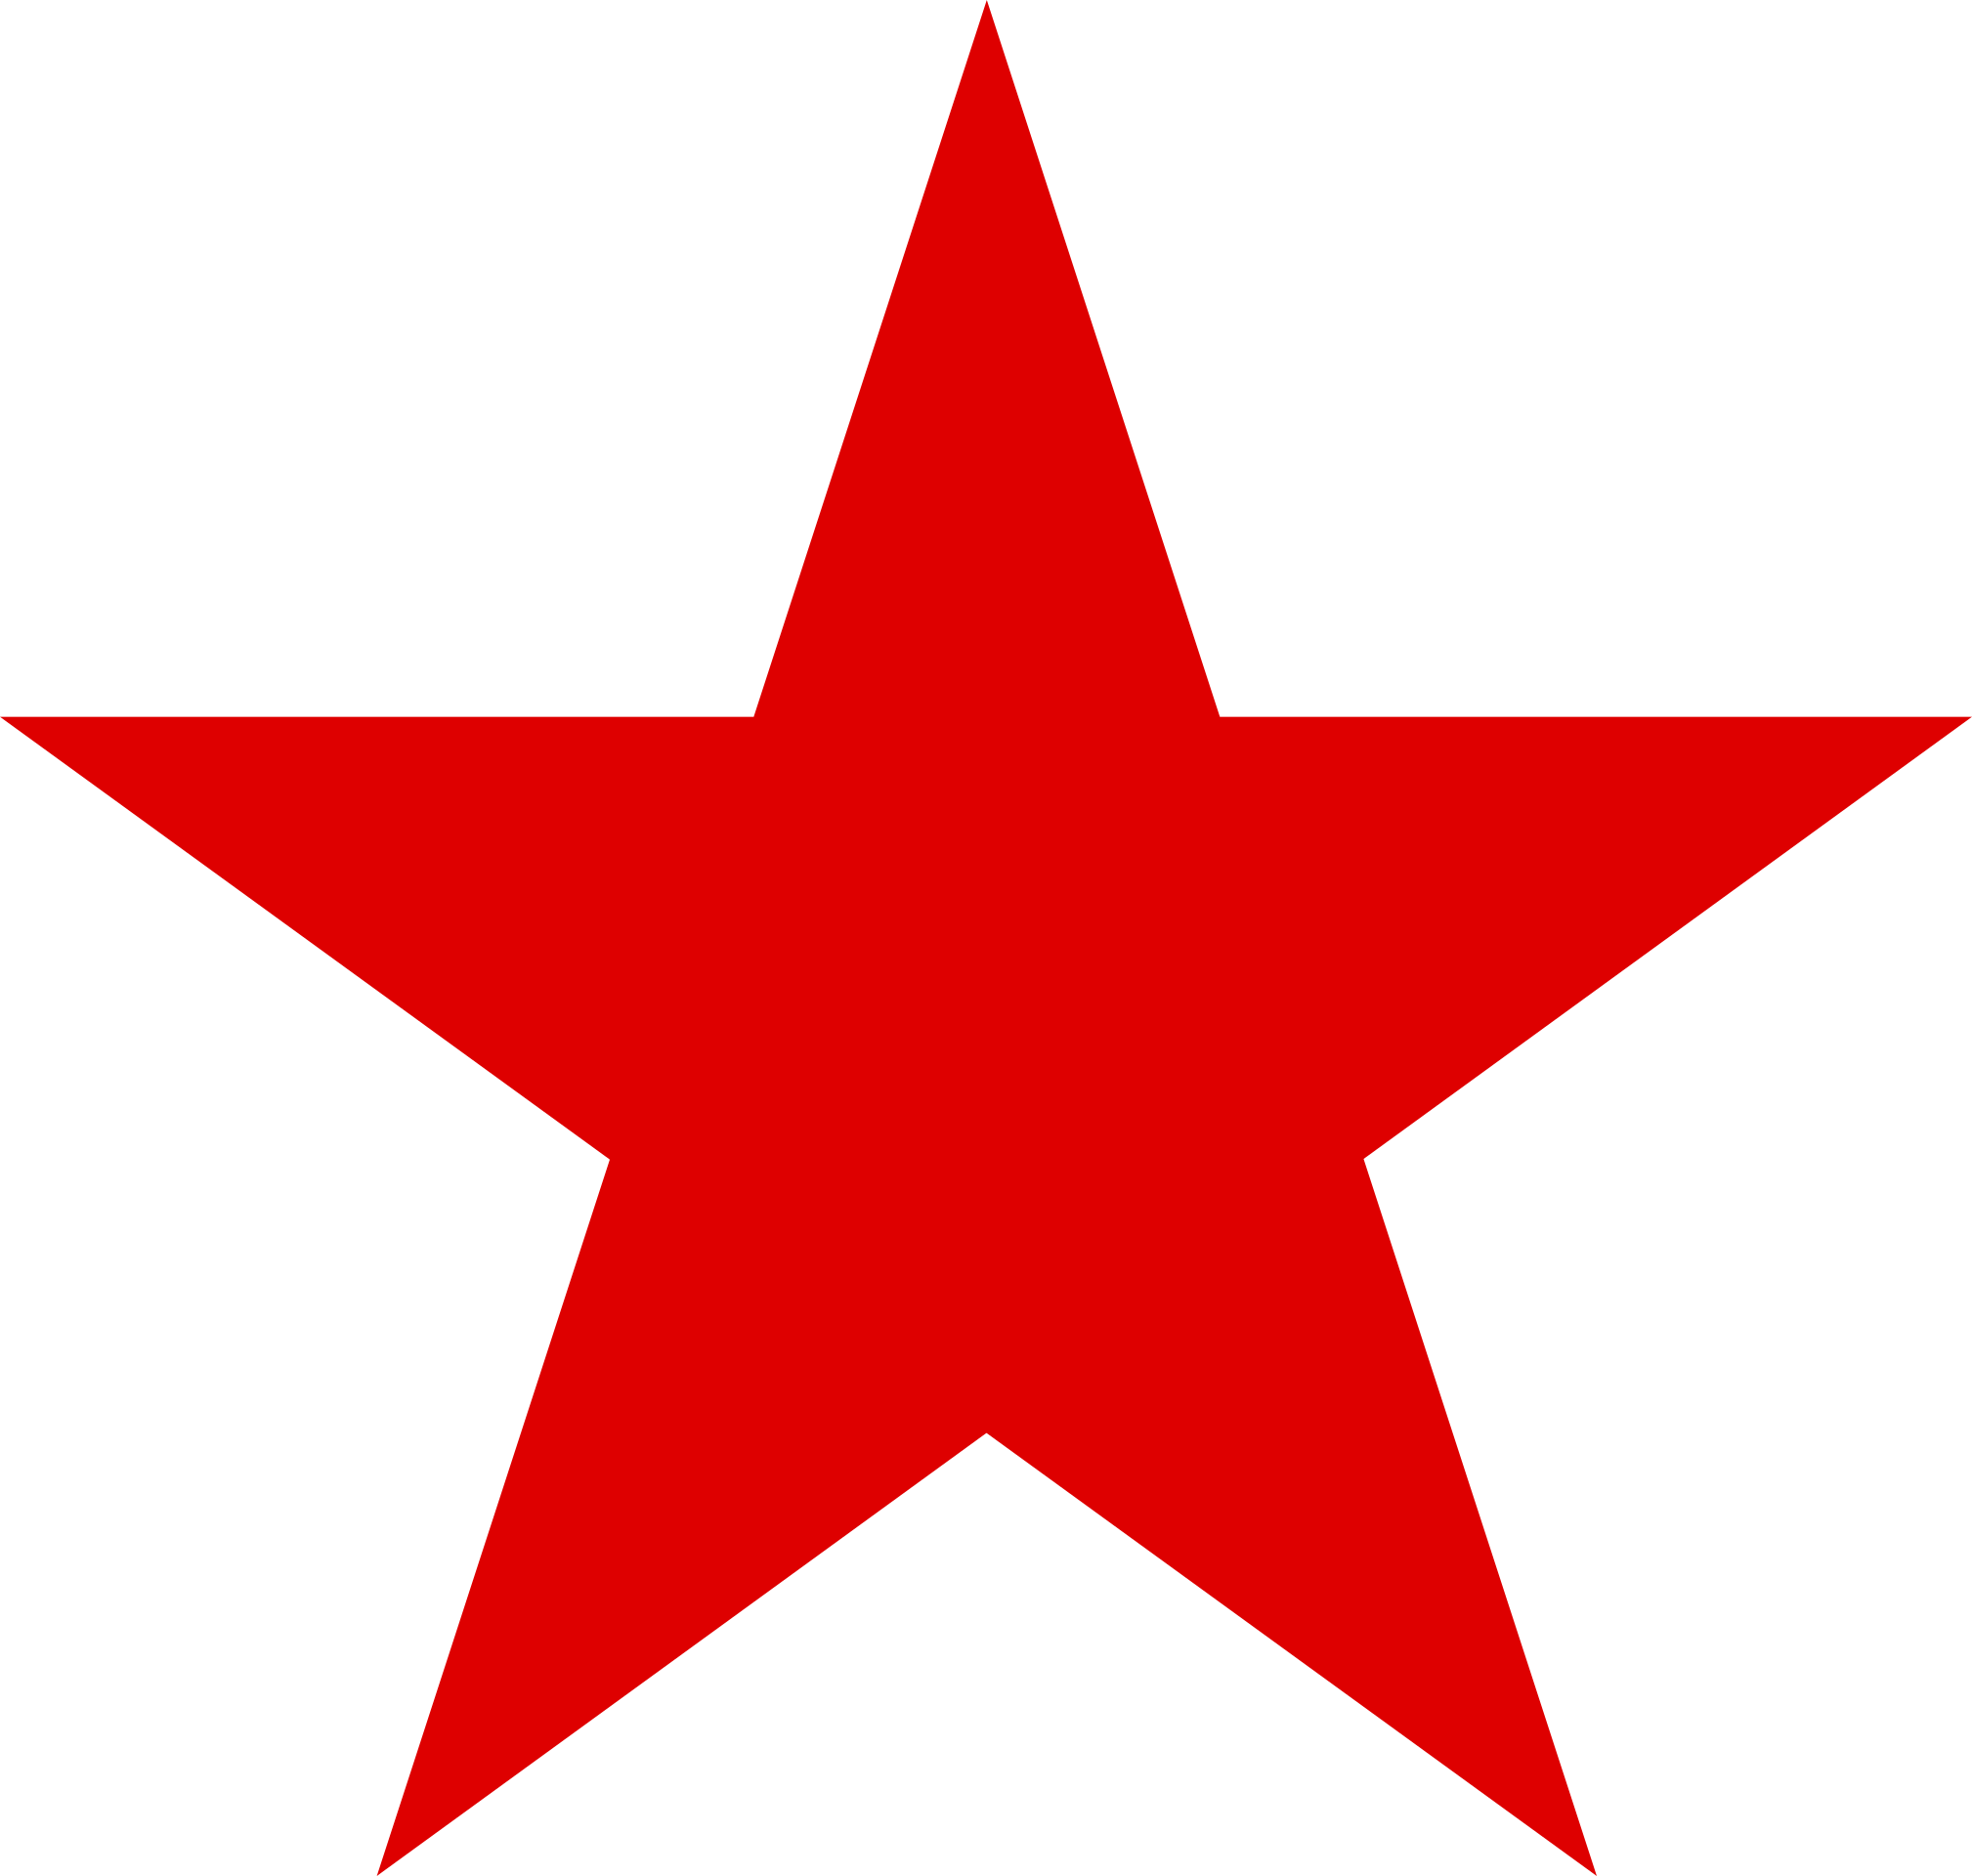 Macy's Red Star Logo - The Shiny Bright Red Holiday Star Brand(s)